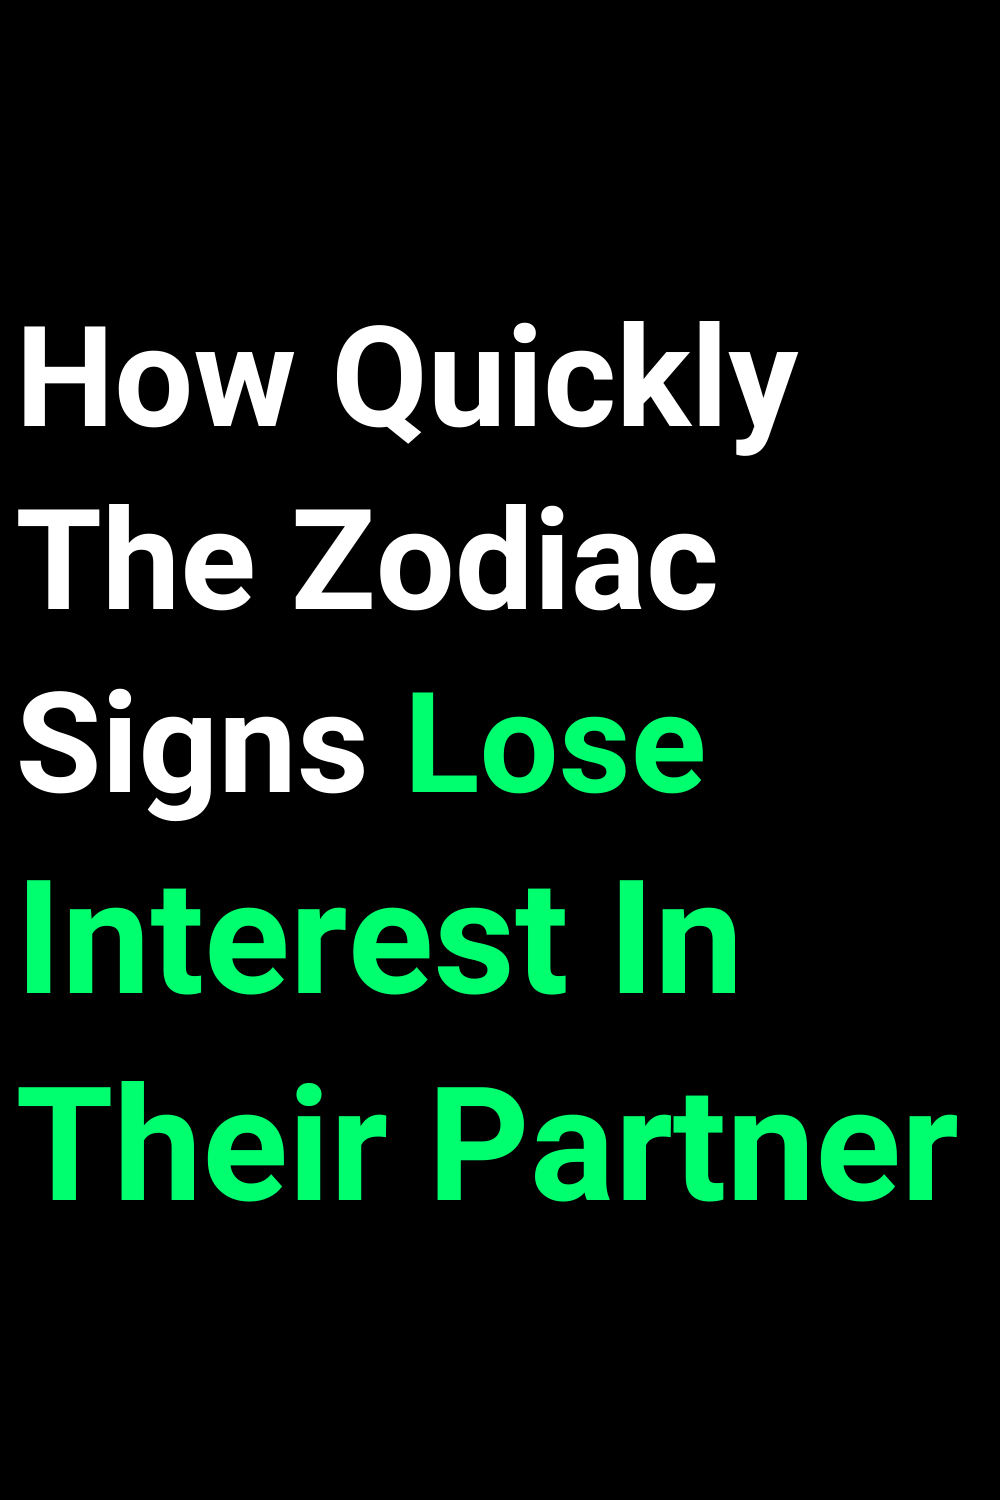 How Quickly The Zodiac Signs Lose Interest In Their Partner